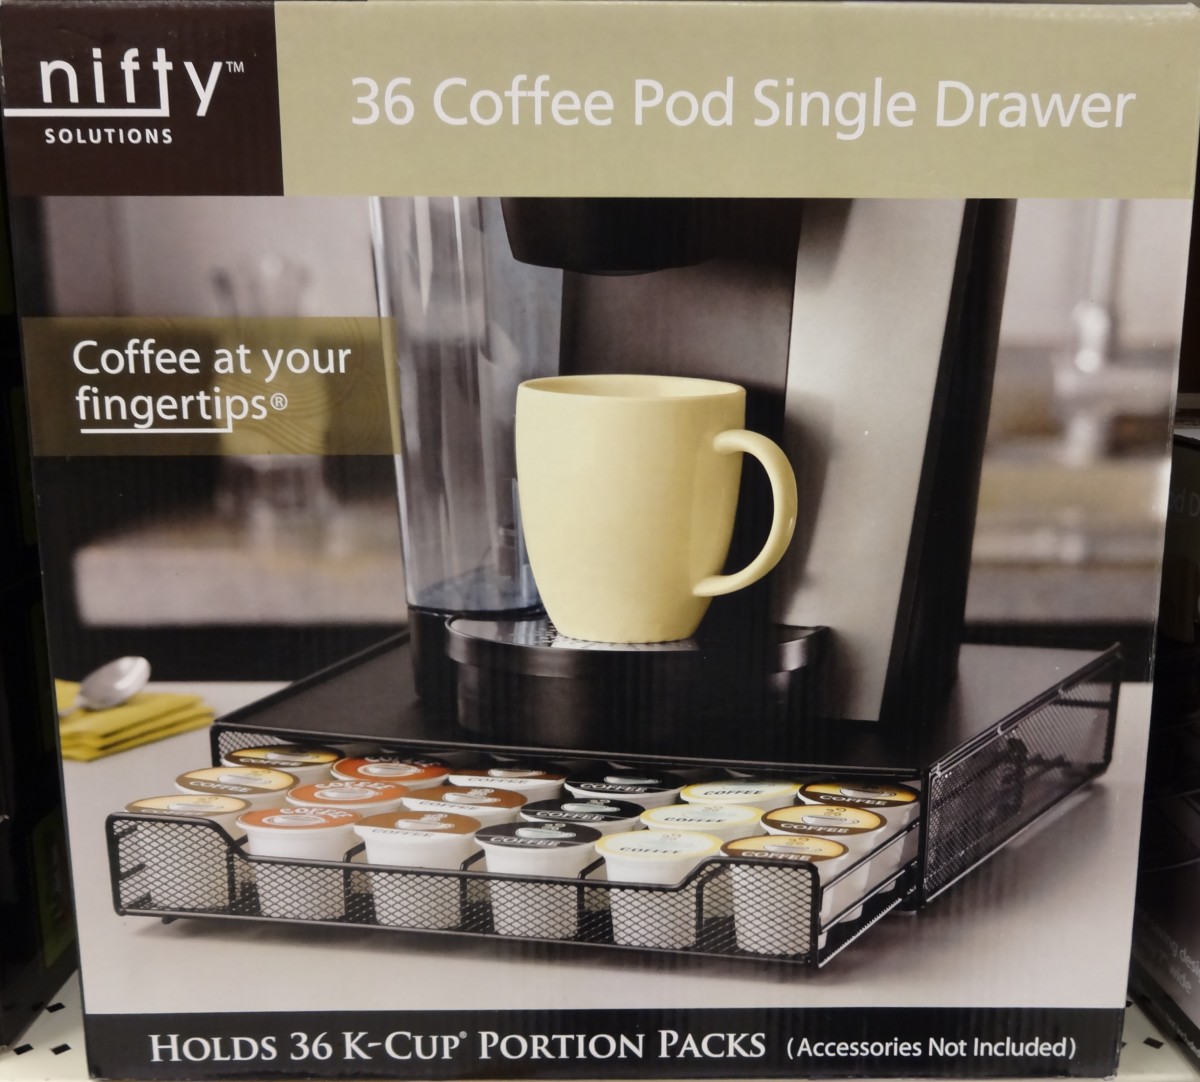 If your mom has a K-Cup drink maker, you may want to think about getting her an organizer.